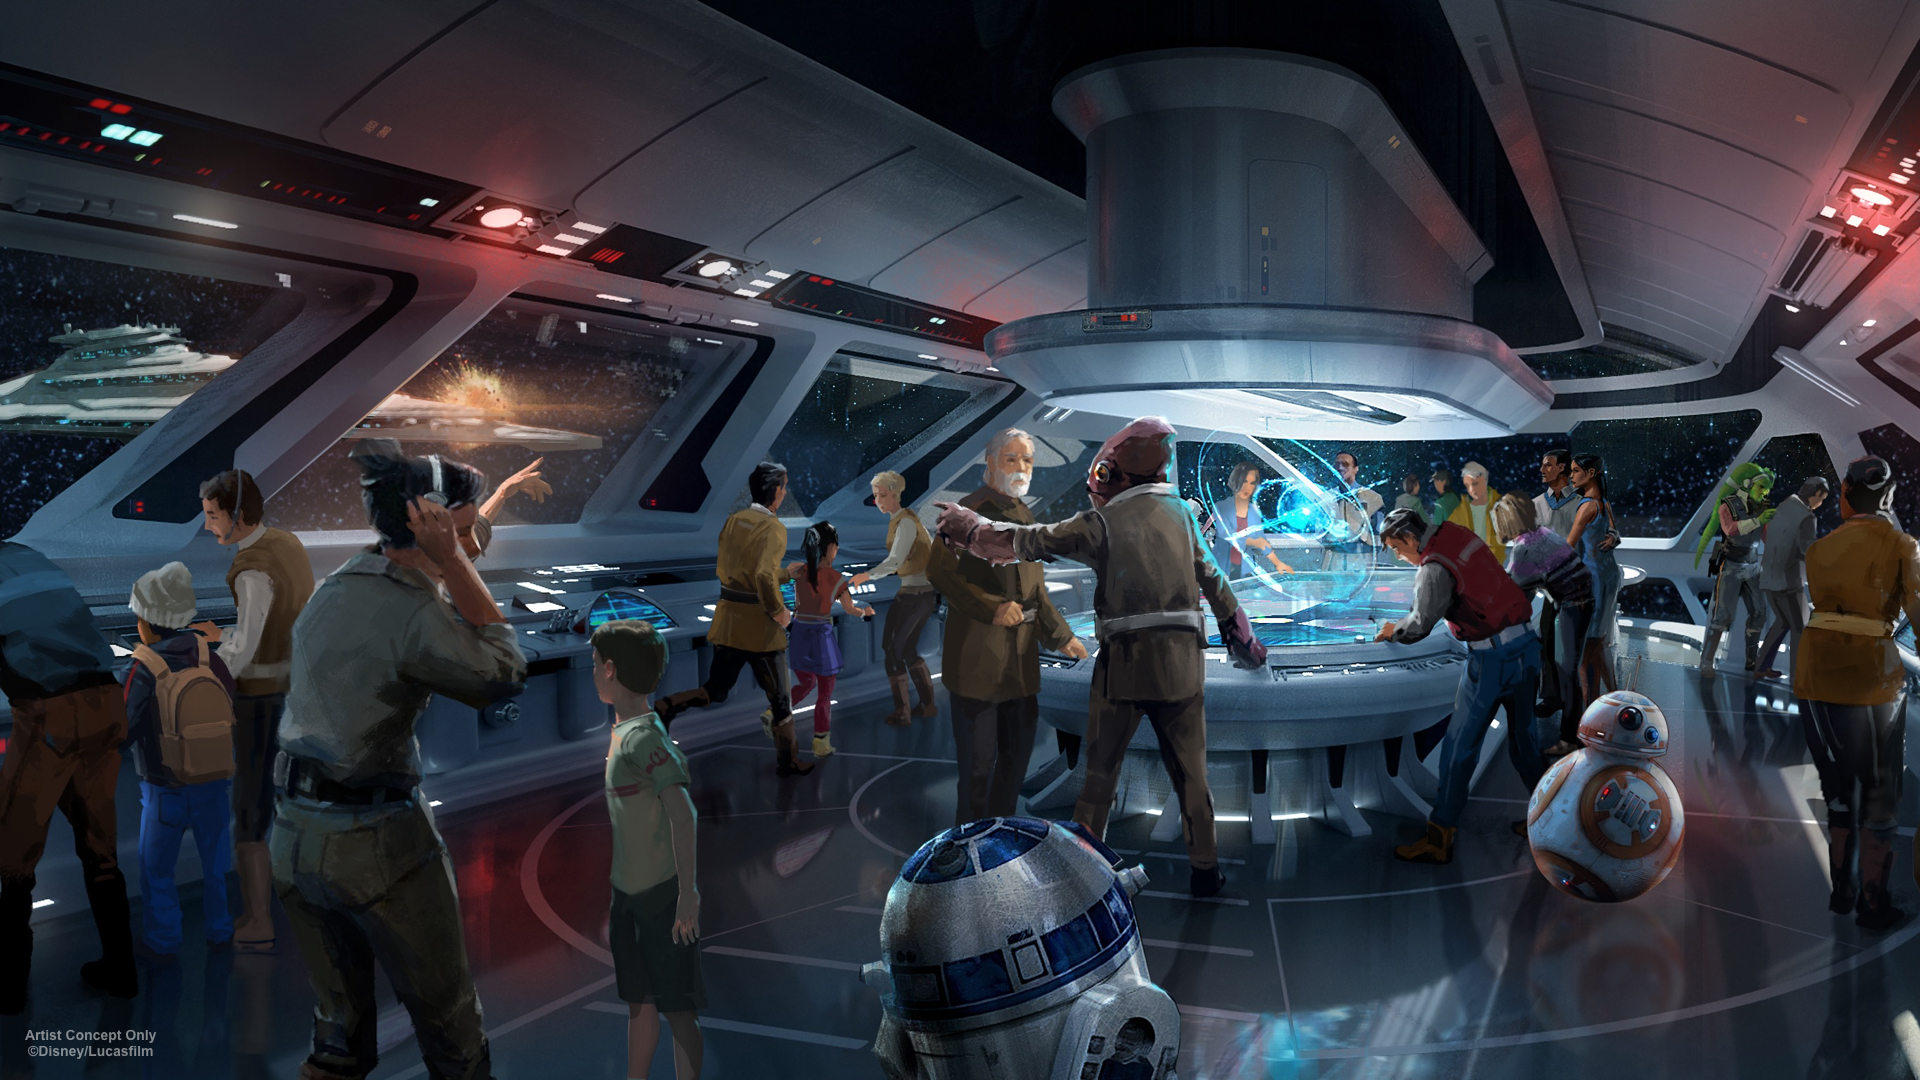 New Permits Show Size of Star Wars Hotel and More